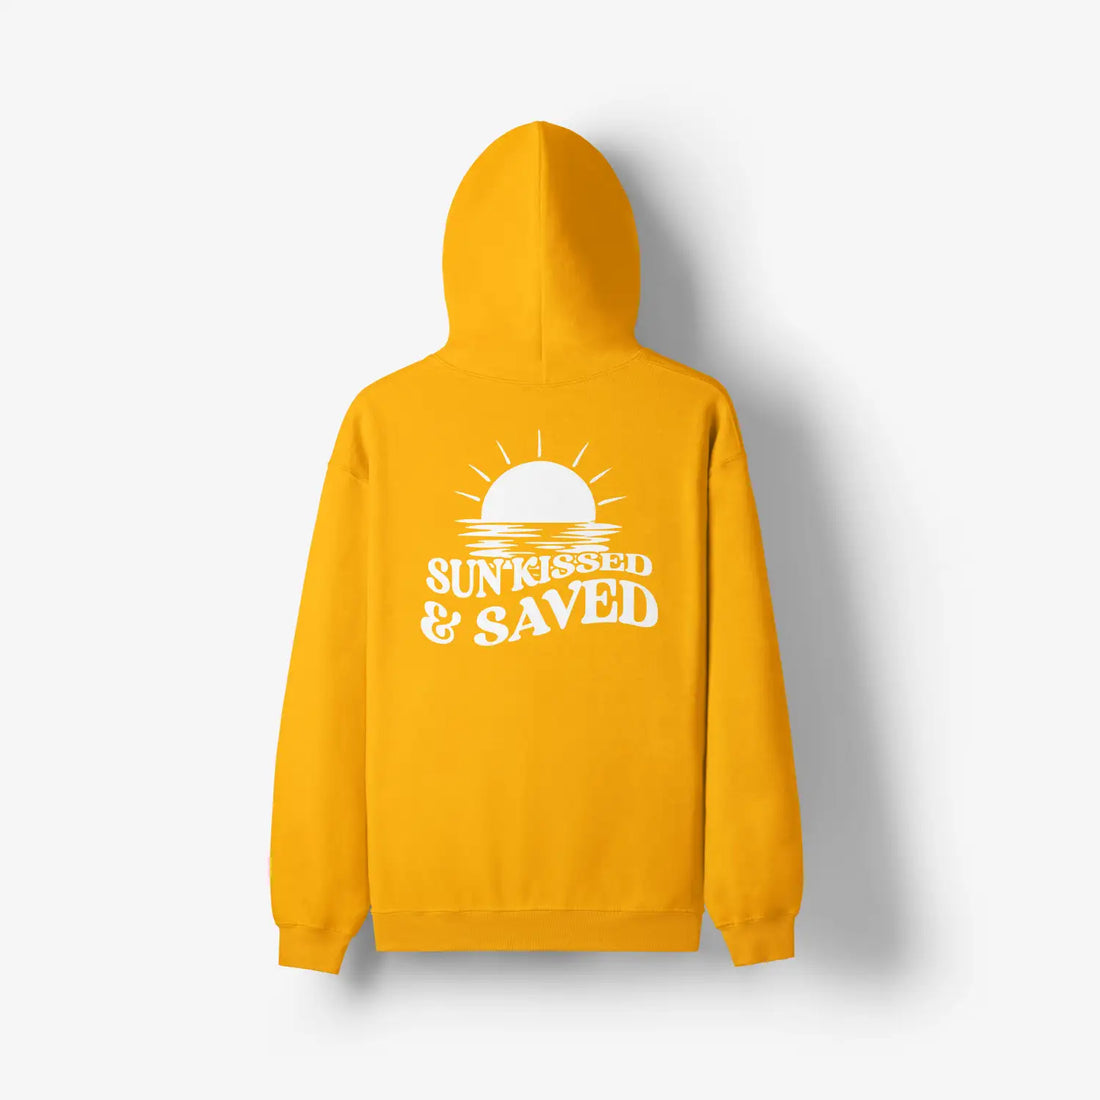 A woman wearing a yellow Sunkissed & Saved Hoodie by Be Still and Know, with the sun raised and saved faithfully printed on it.